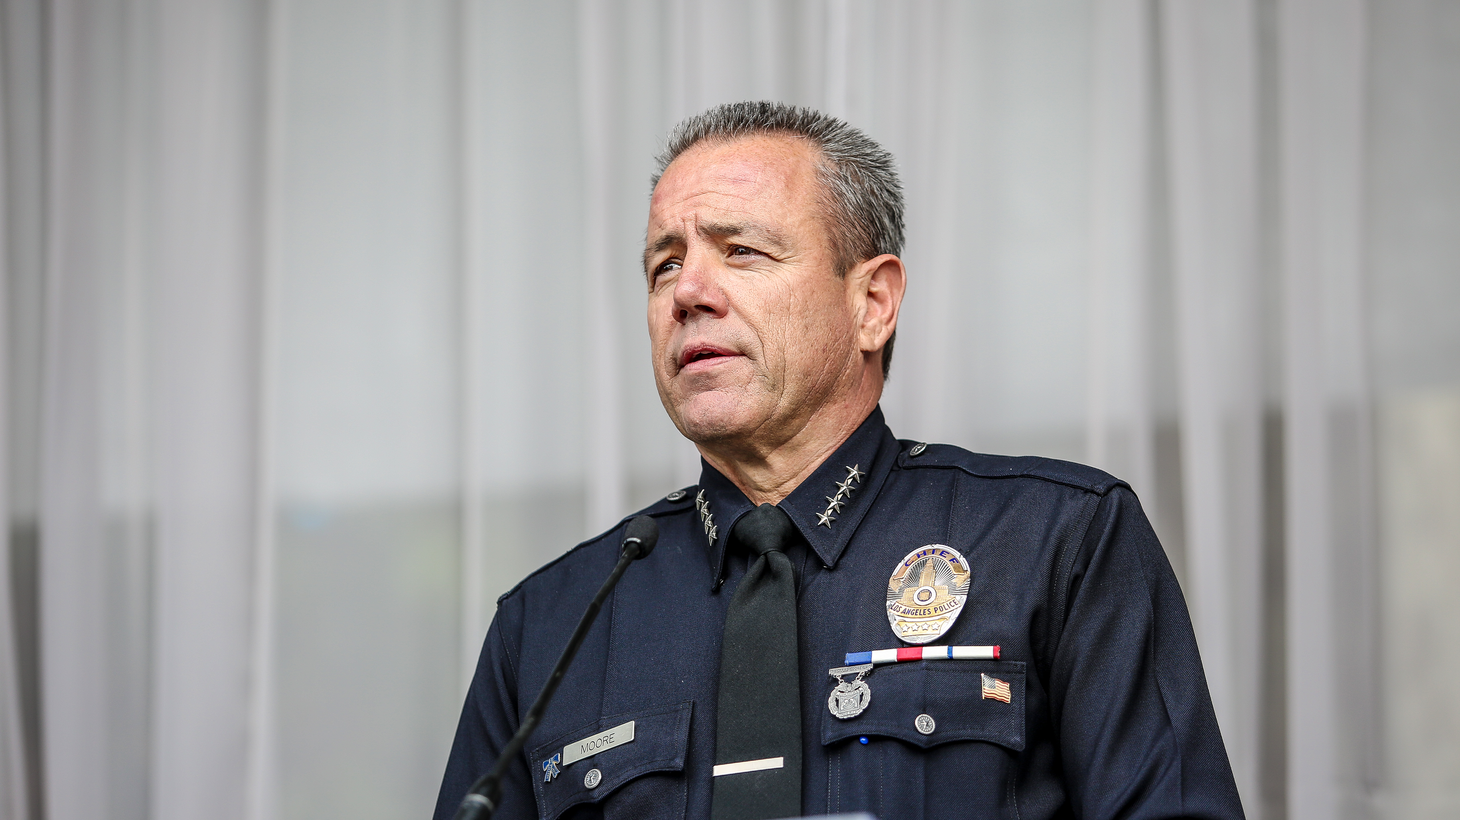 Will LAPD Police Chief Michel Moore gain a second term? That decision lies with the LA Police Commission.